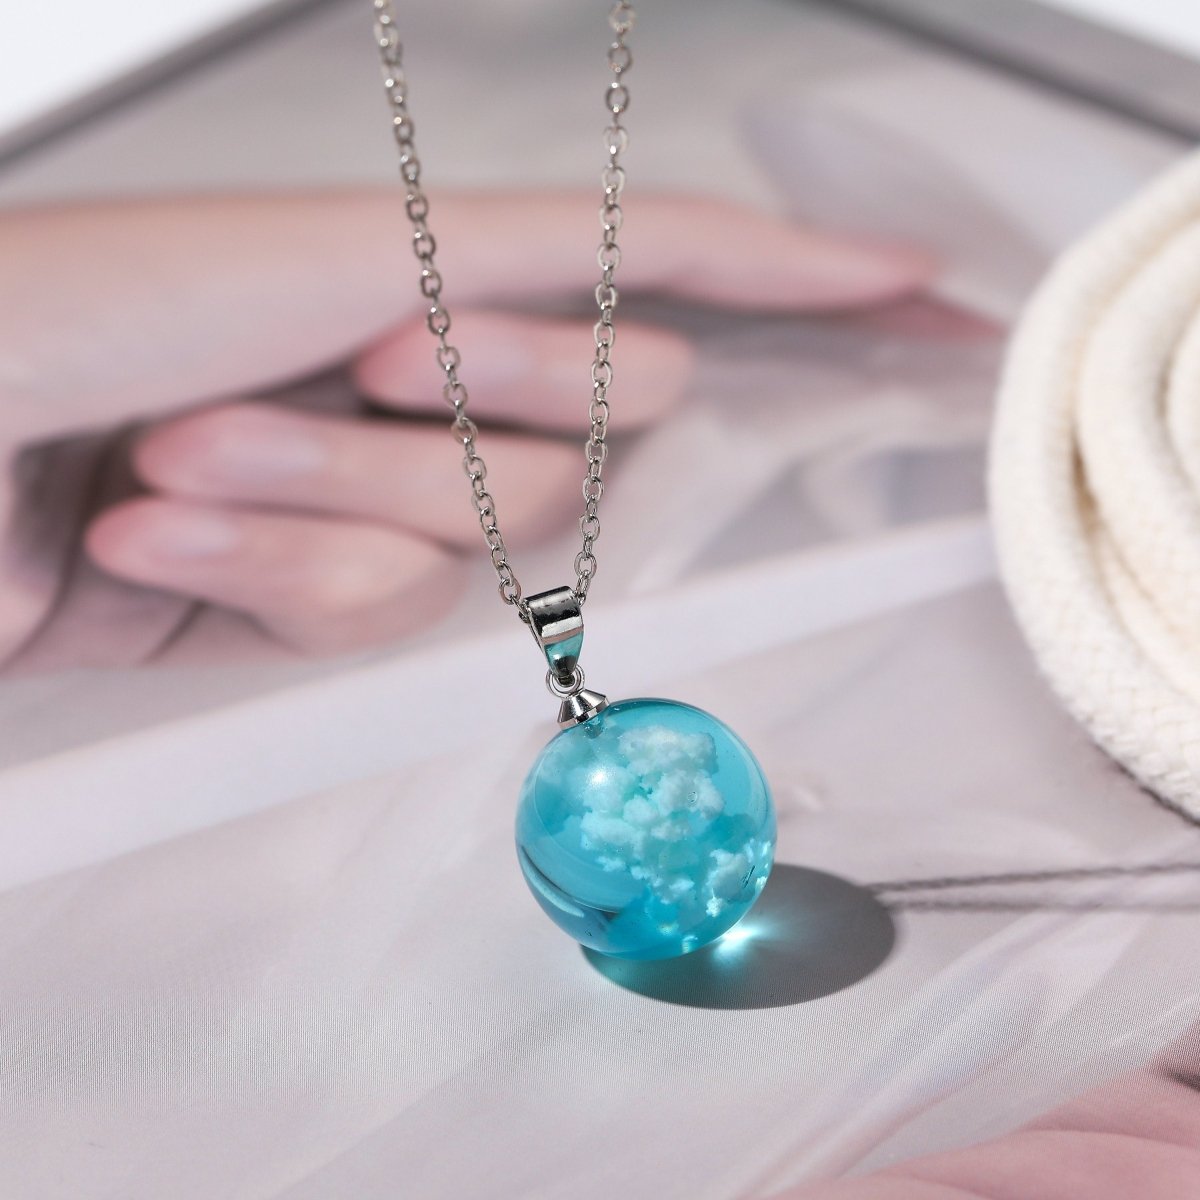 Cloudy Sky w/Bird & Blue Resin Sphere Necklace Pendant White Clouds